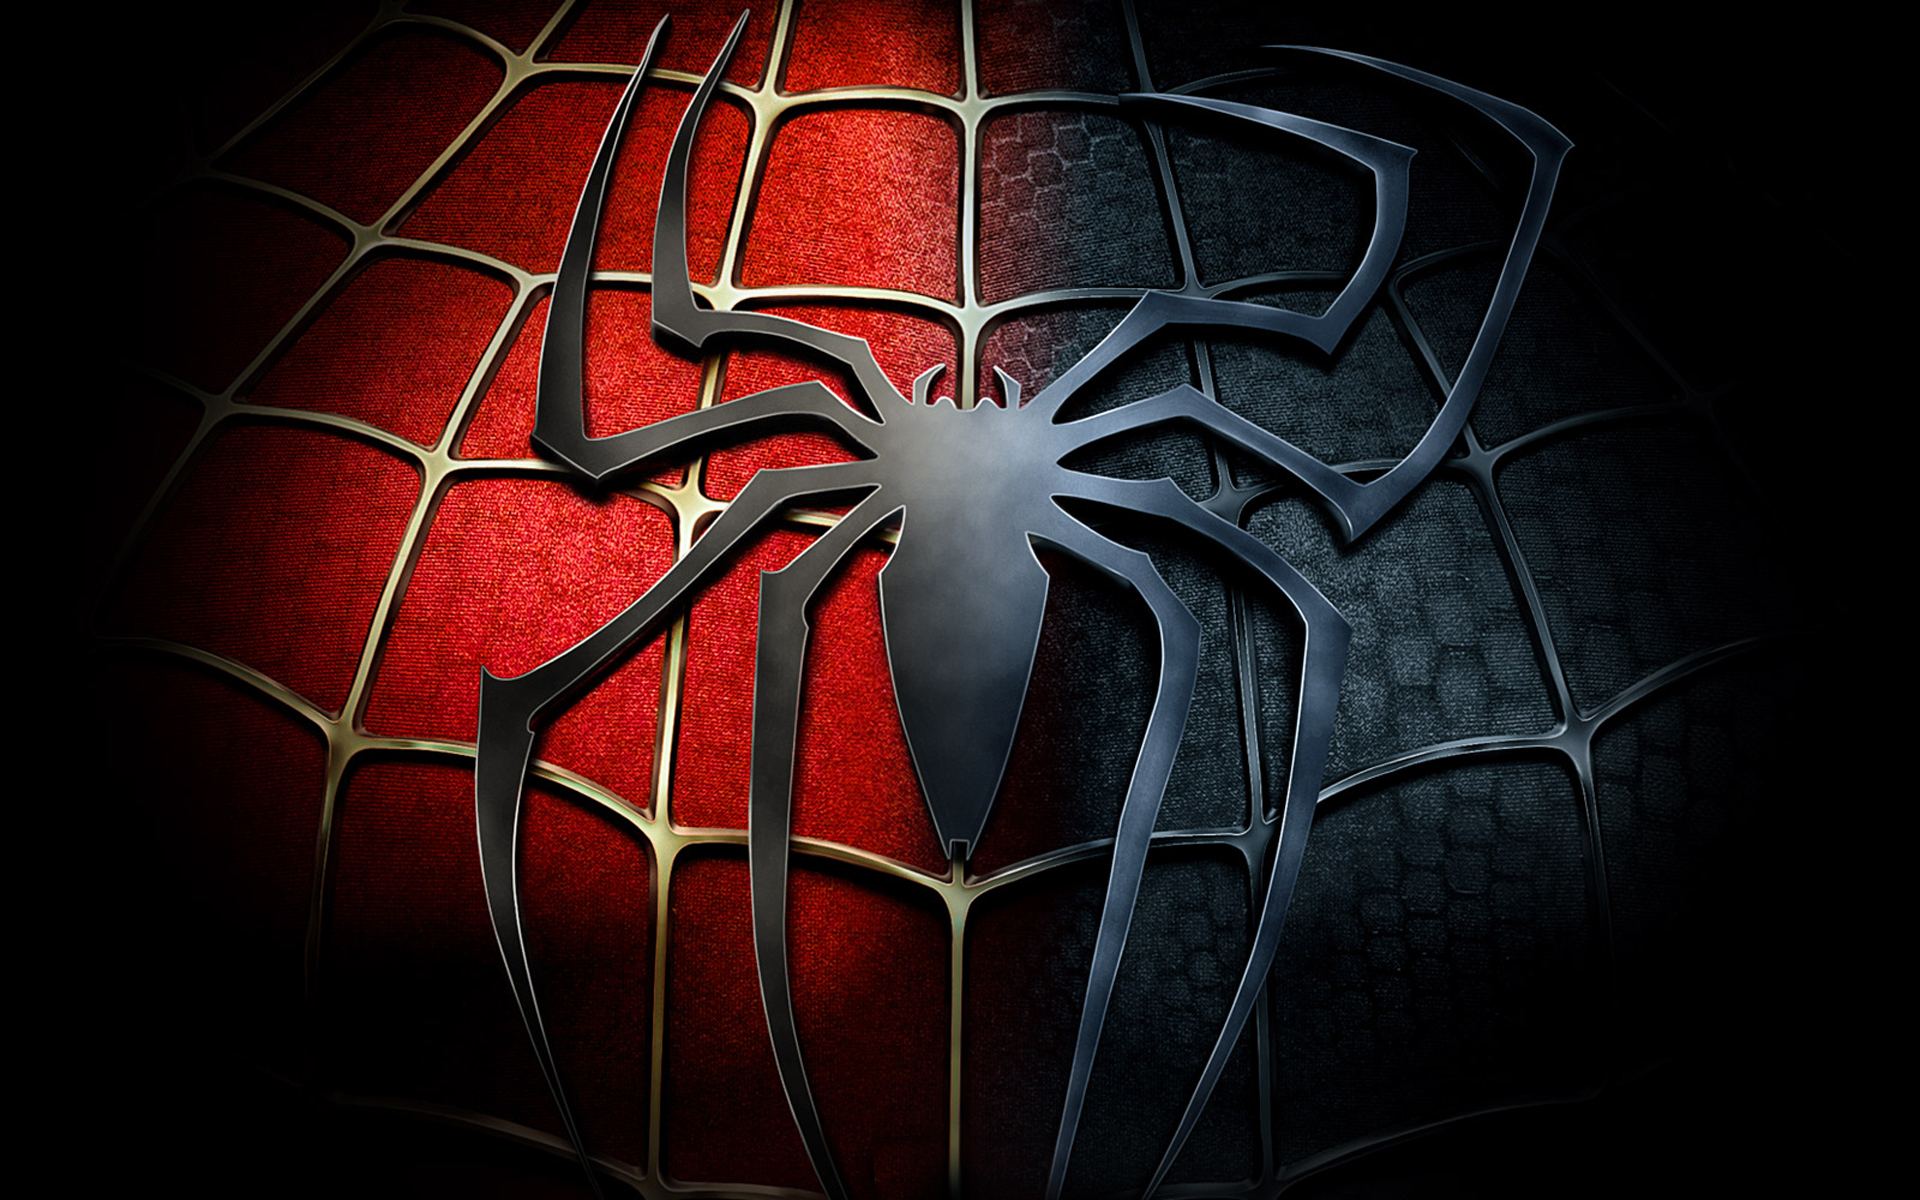  Black  Spiderman  Iphone Backgrounds  Download Free 